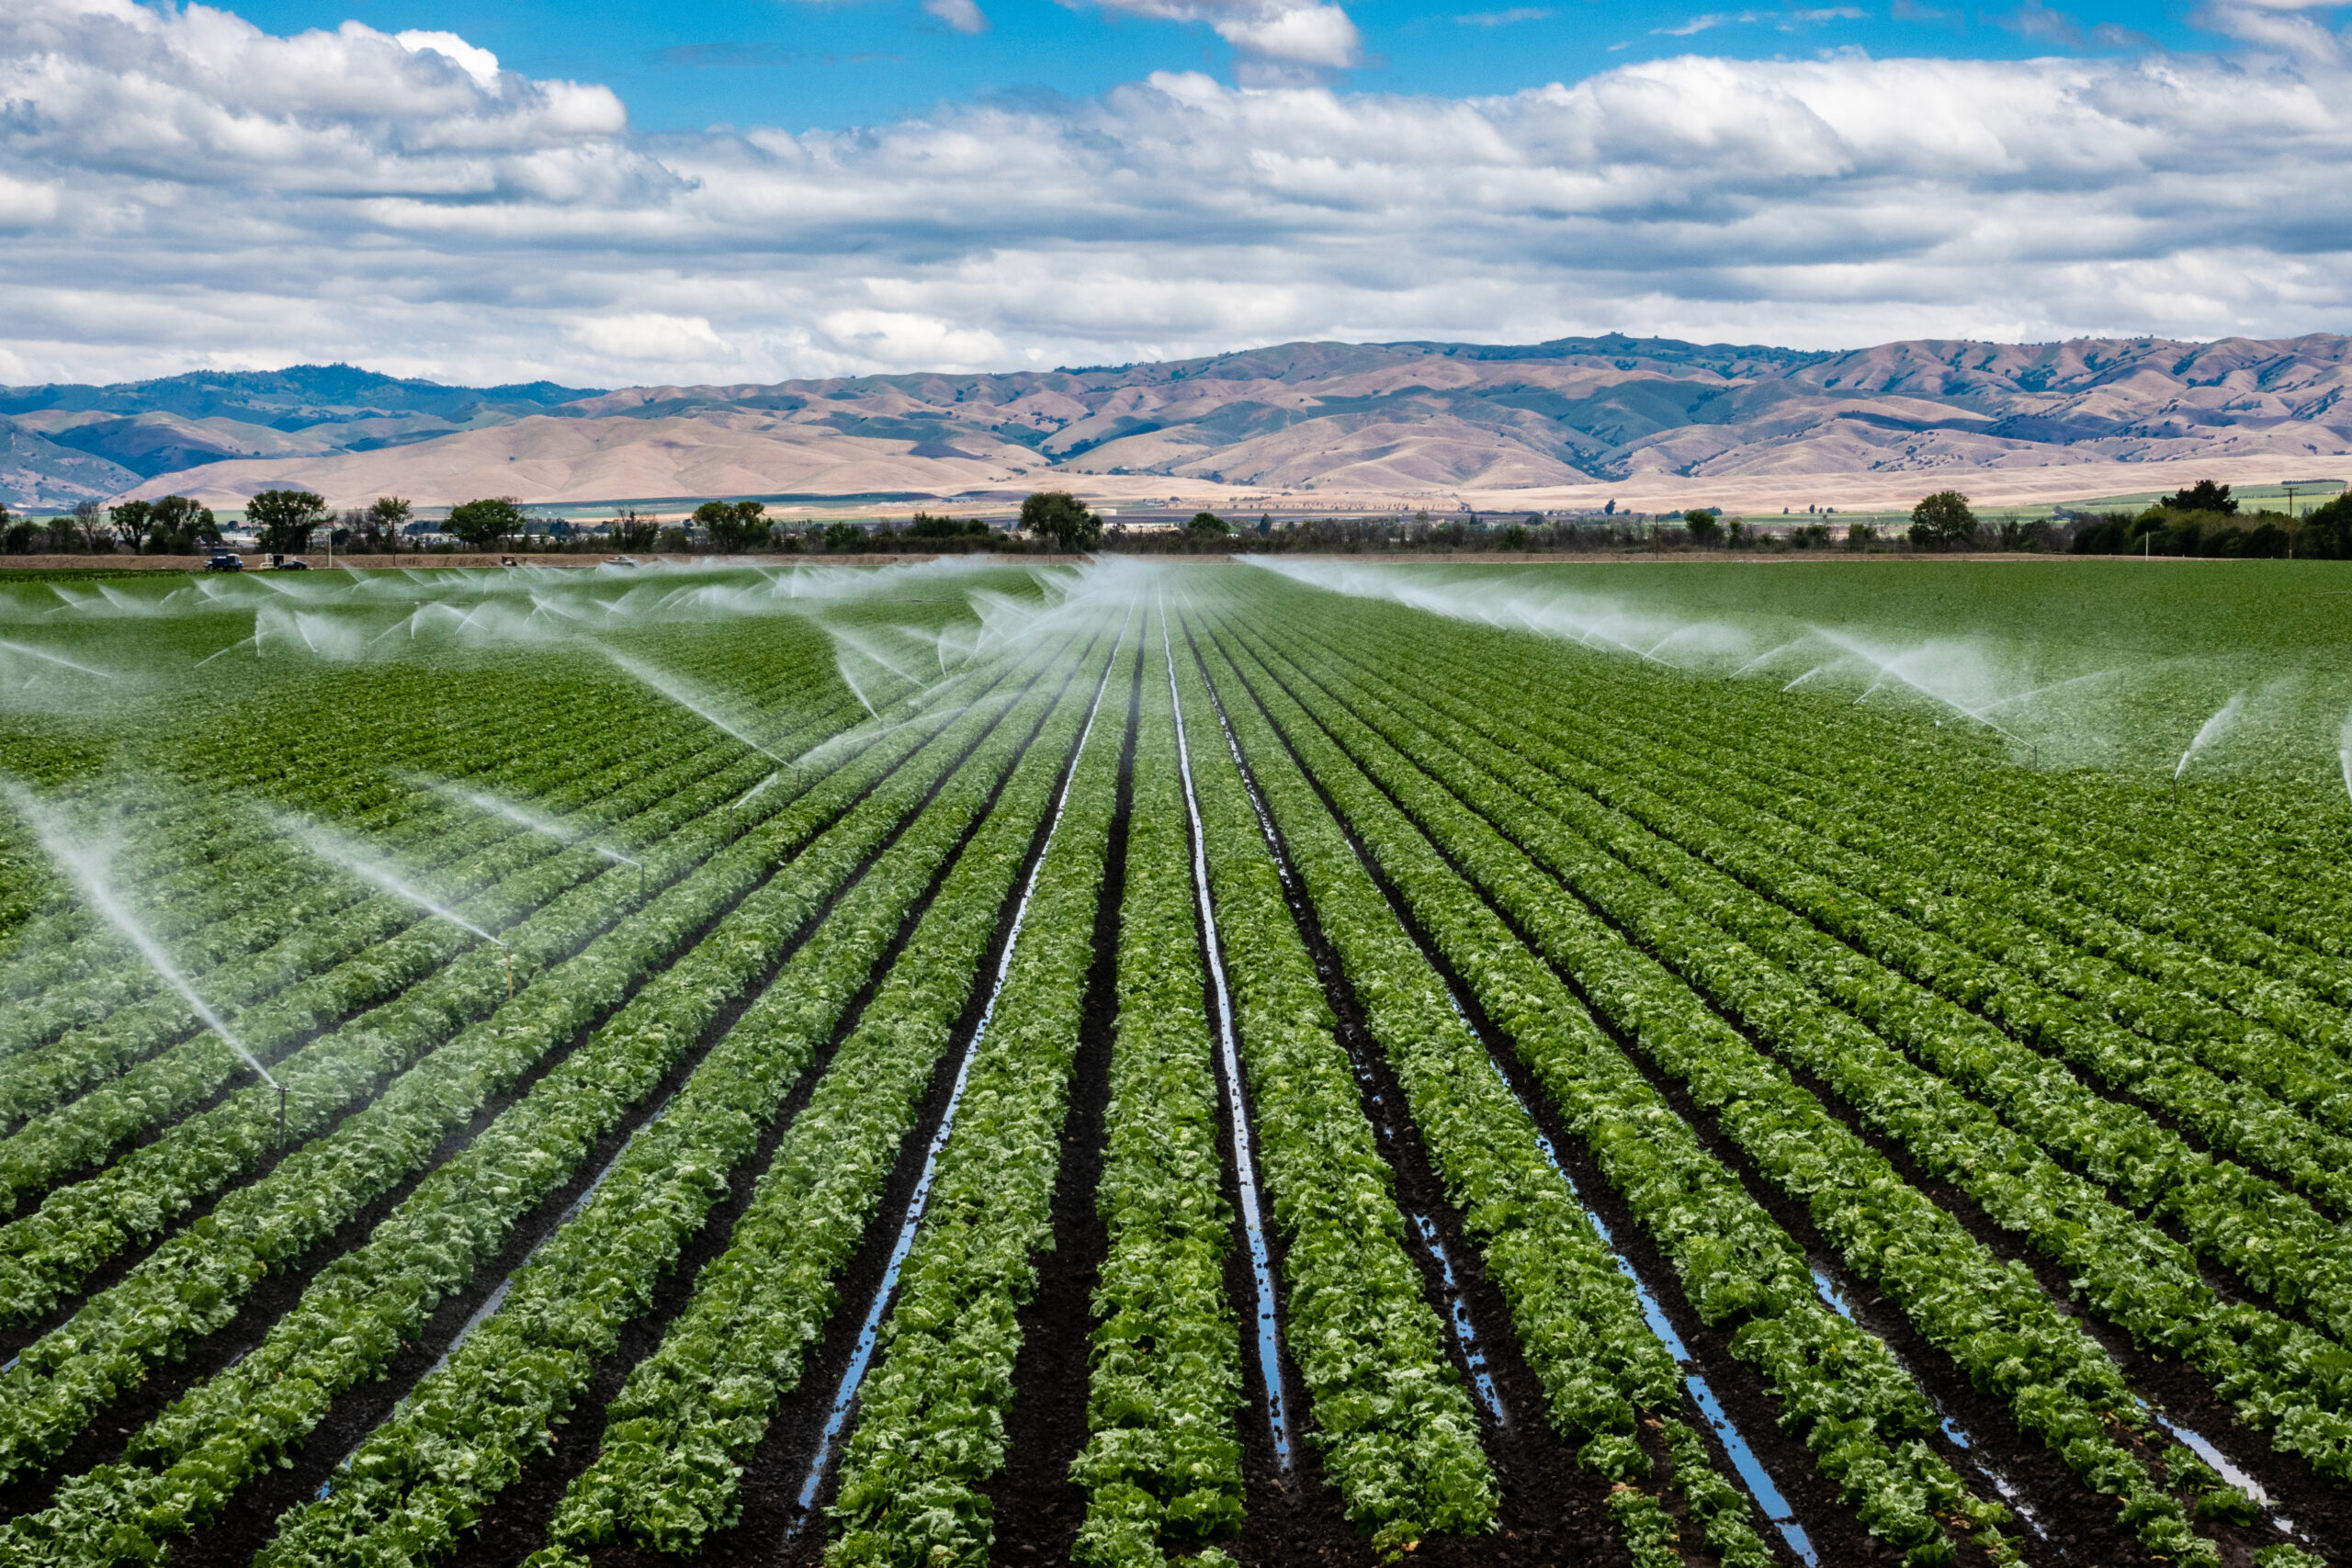 A field irrigation sprinkler system waters rows of lettuce crops